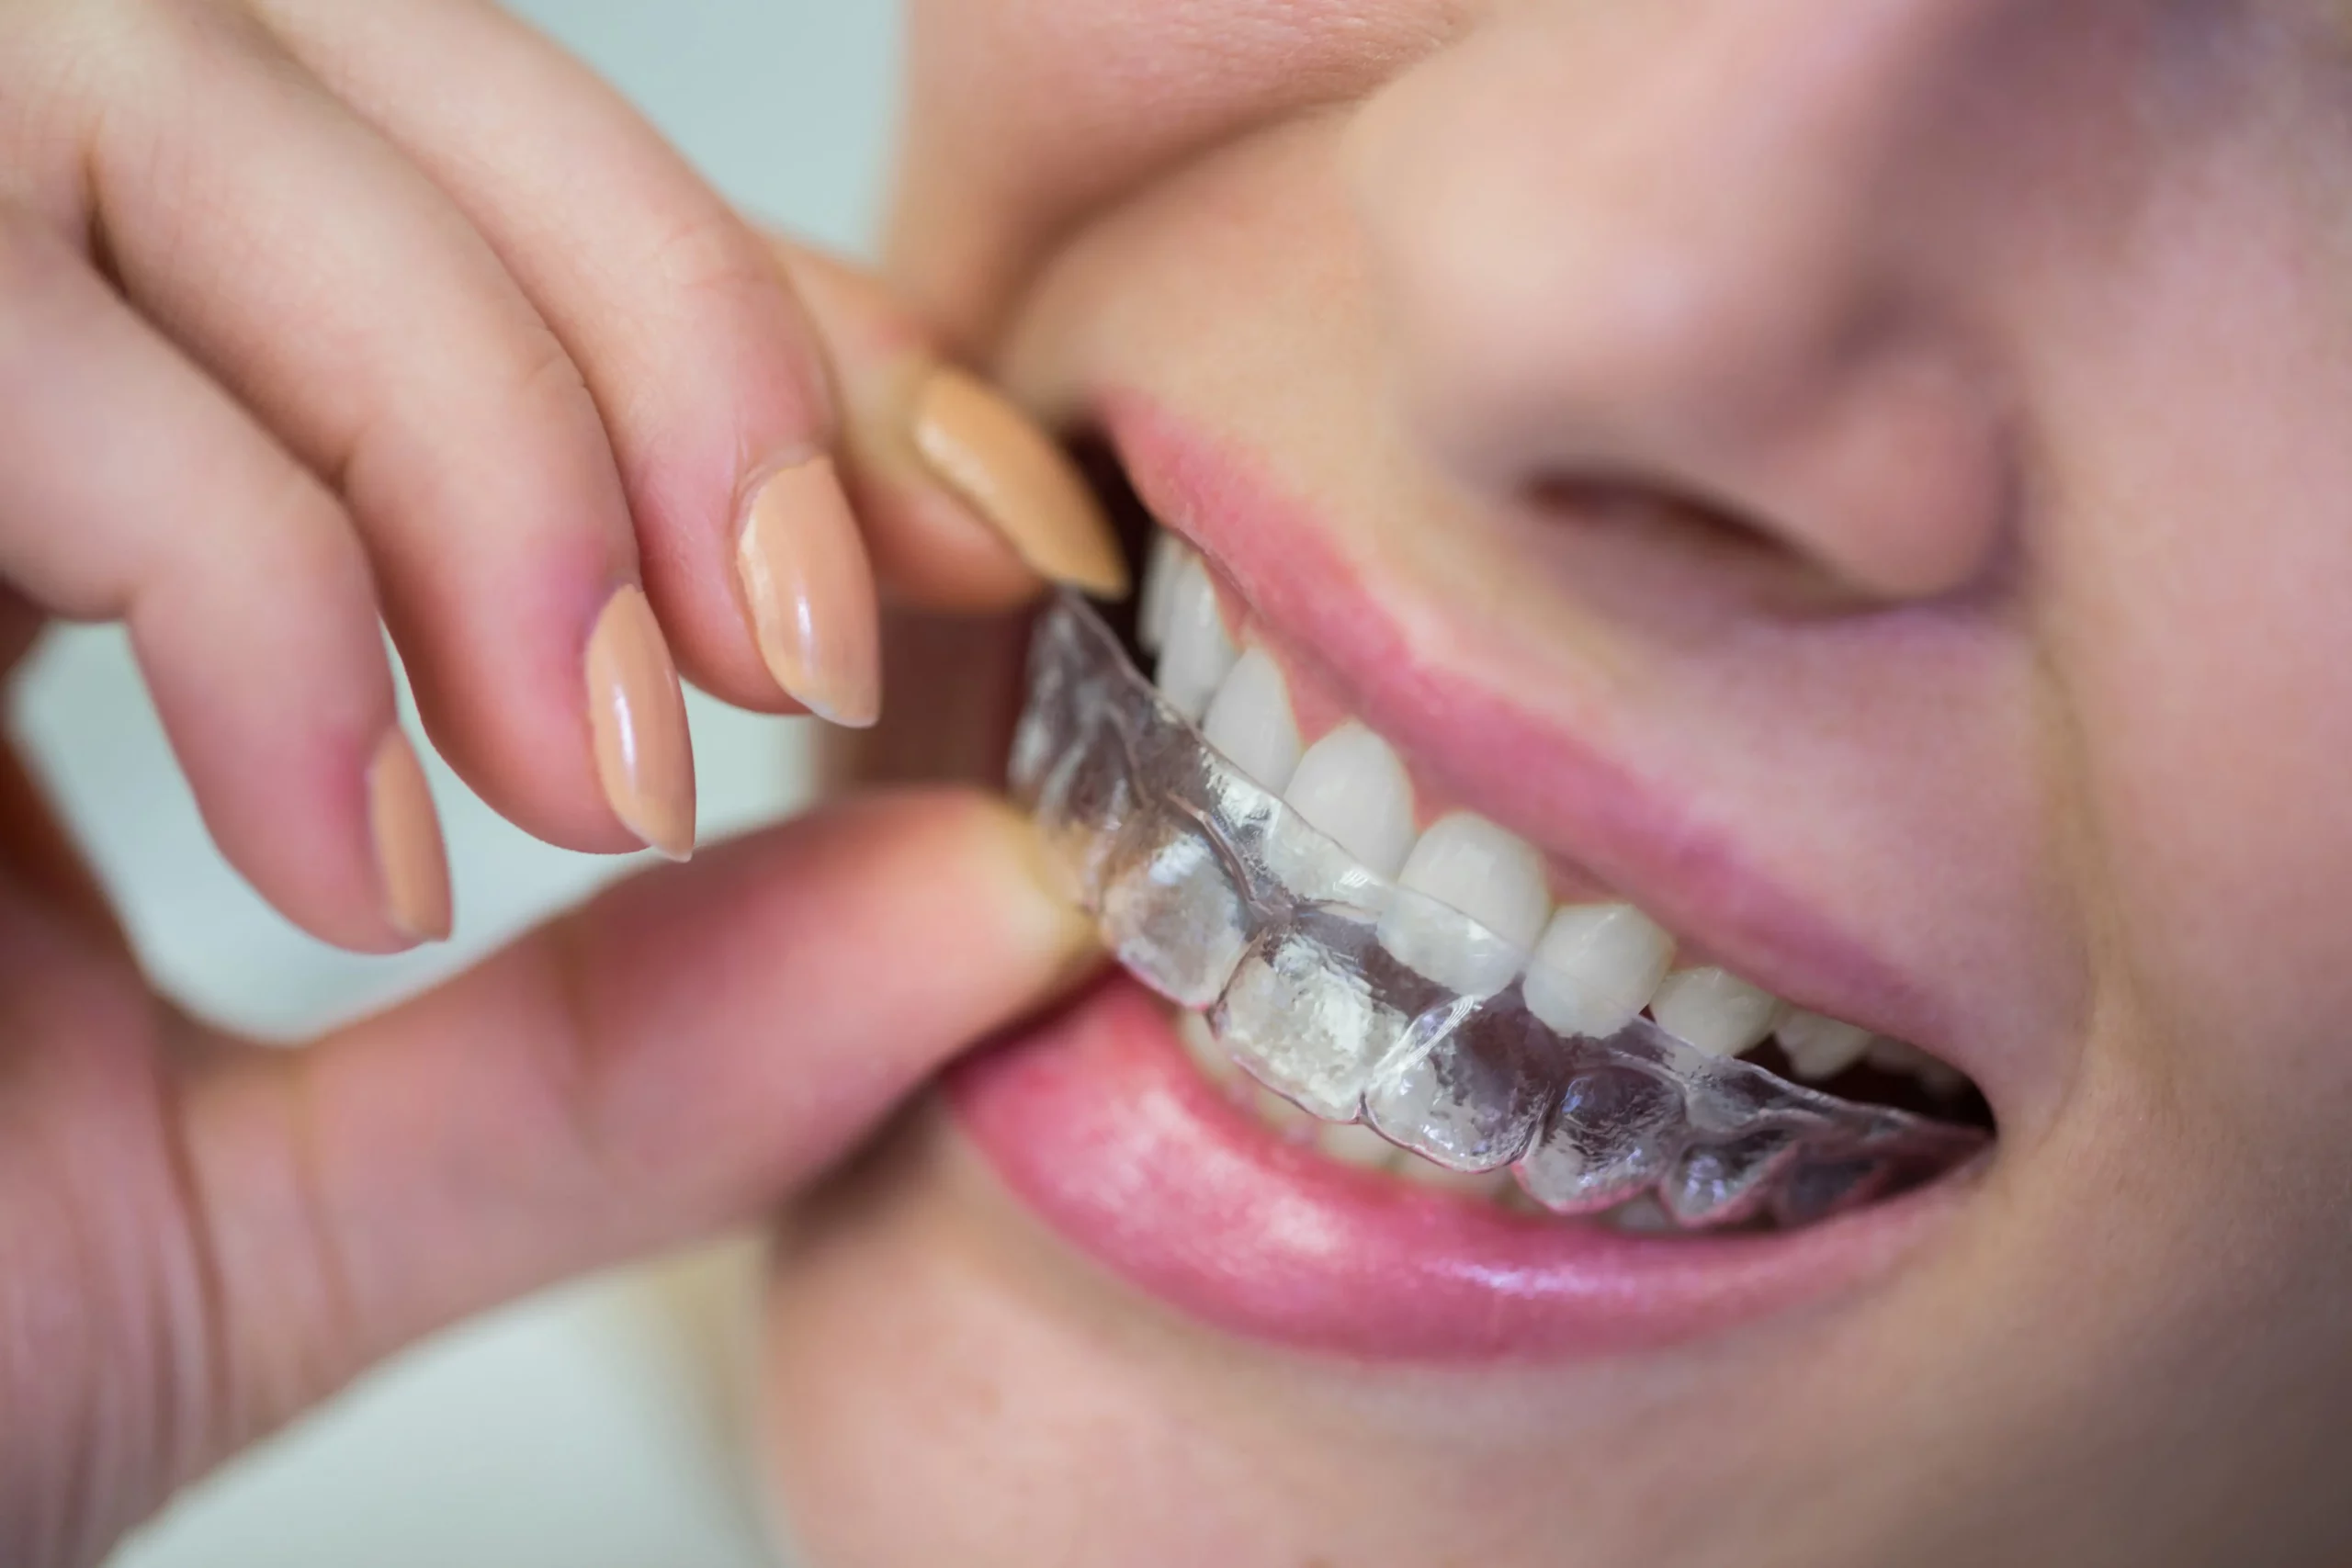 Teens and adults with mild to moderate teeth misalignment can get invisalign treatment